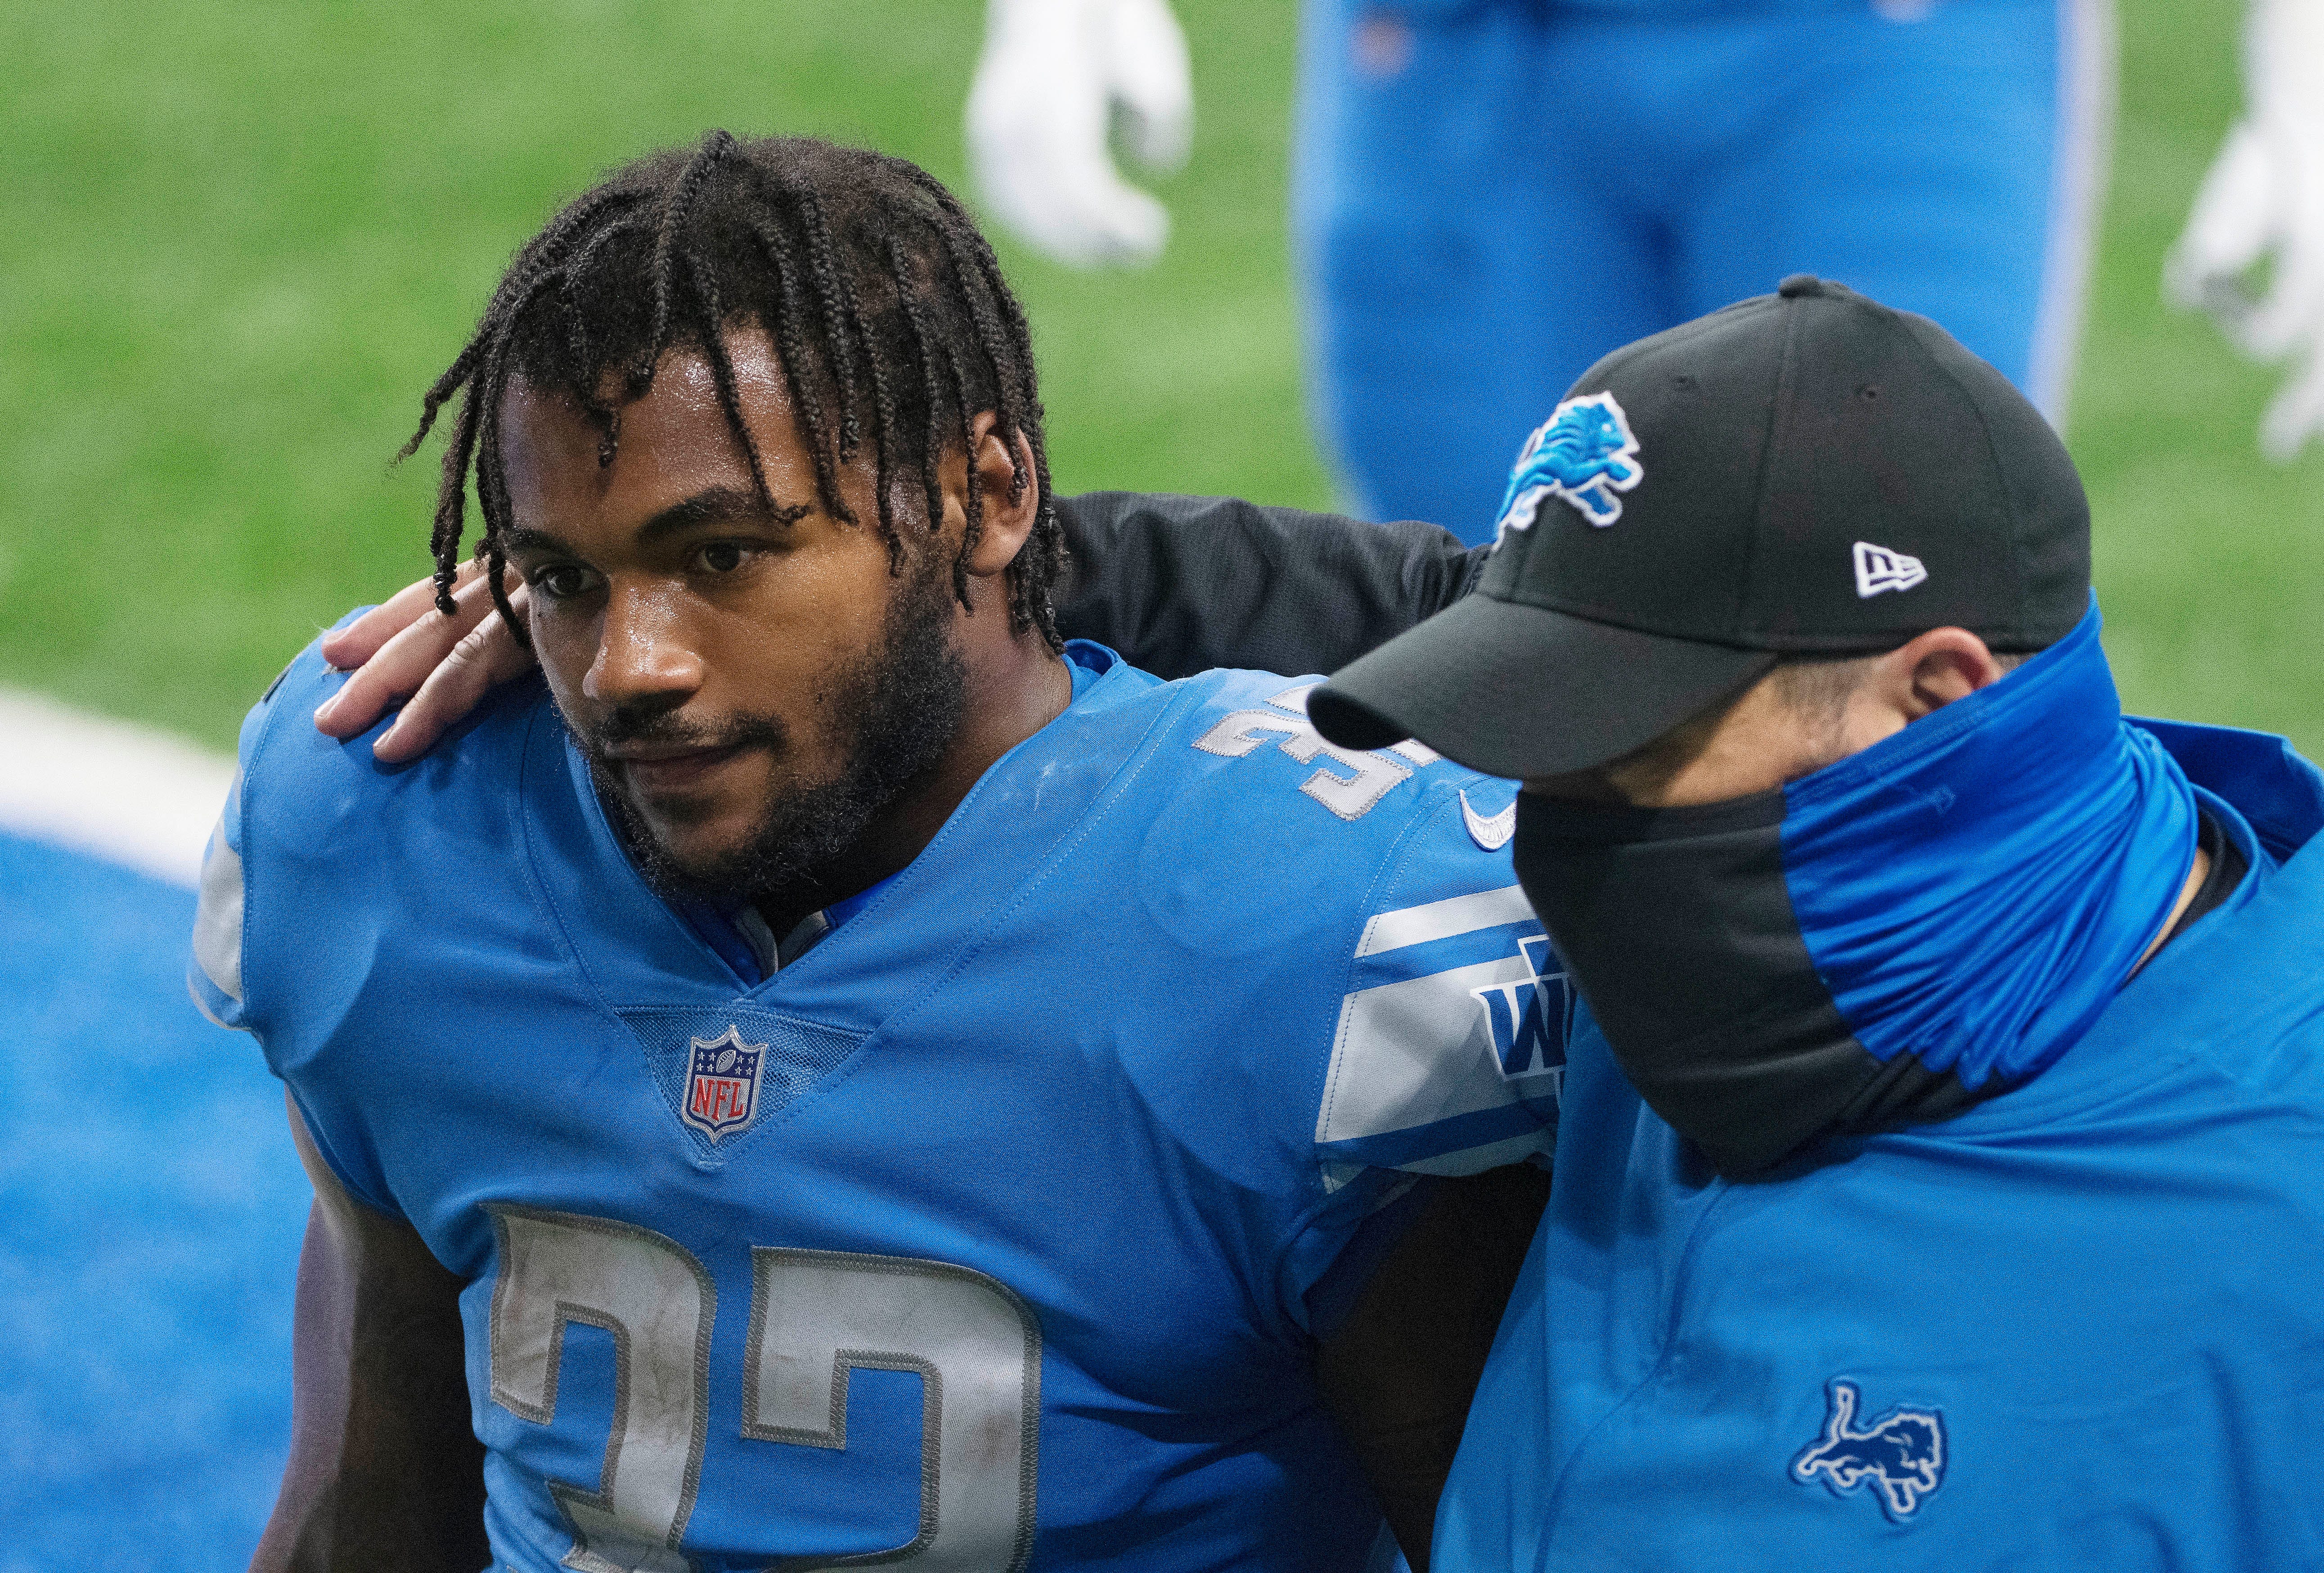 Lions rookie running back D'Andre Swift is comforted by head coach Matt Patricia walking off the field after dropping a possible game-winning touchdown catch late in the fourth quarter on September 13, 2020.